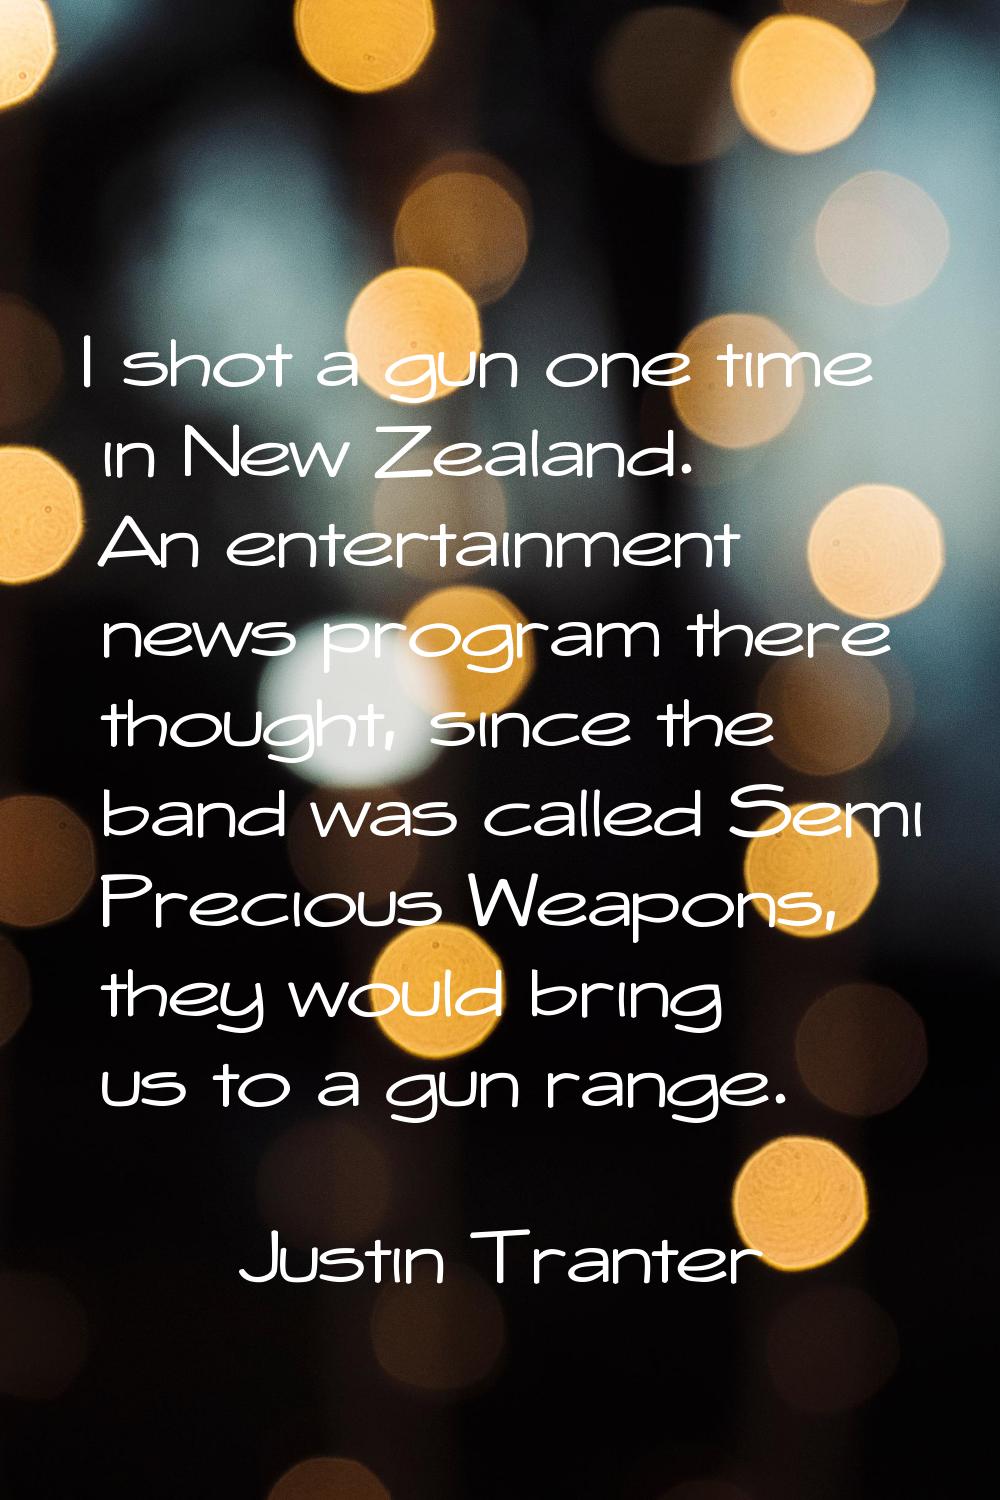 I shot a gun one time in New Zealand. An entertainment news program there thought, since the band w